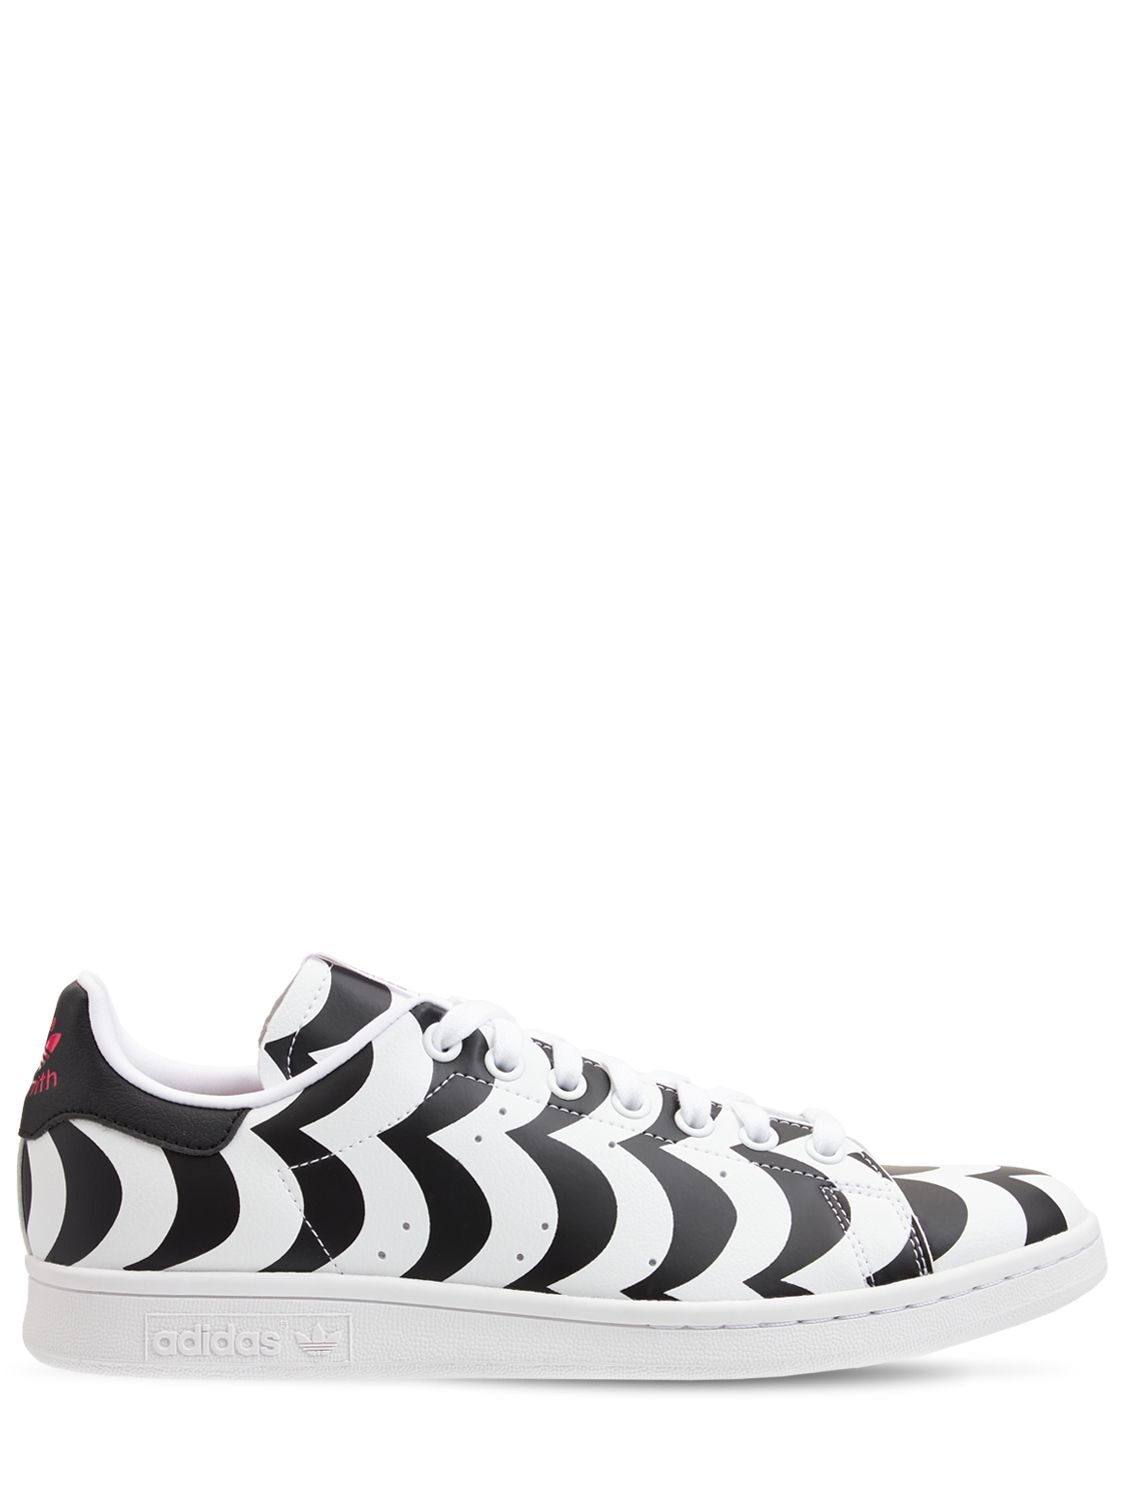 Adidas Originals Smith Sneakers In Black And White In Colour/ Magenta/ | ModeSens